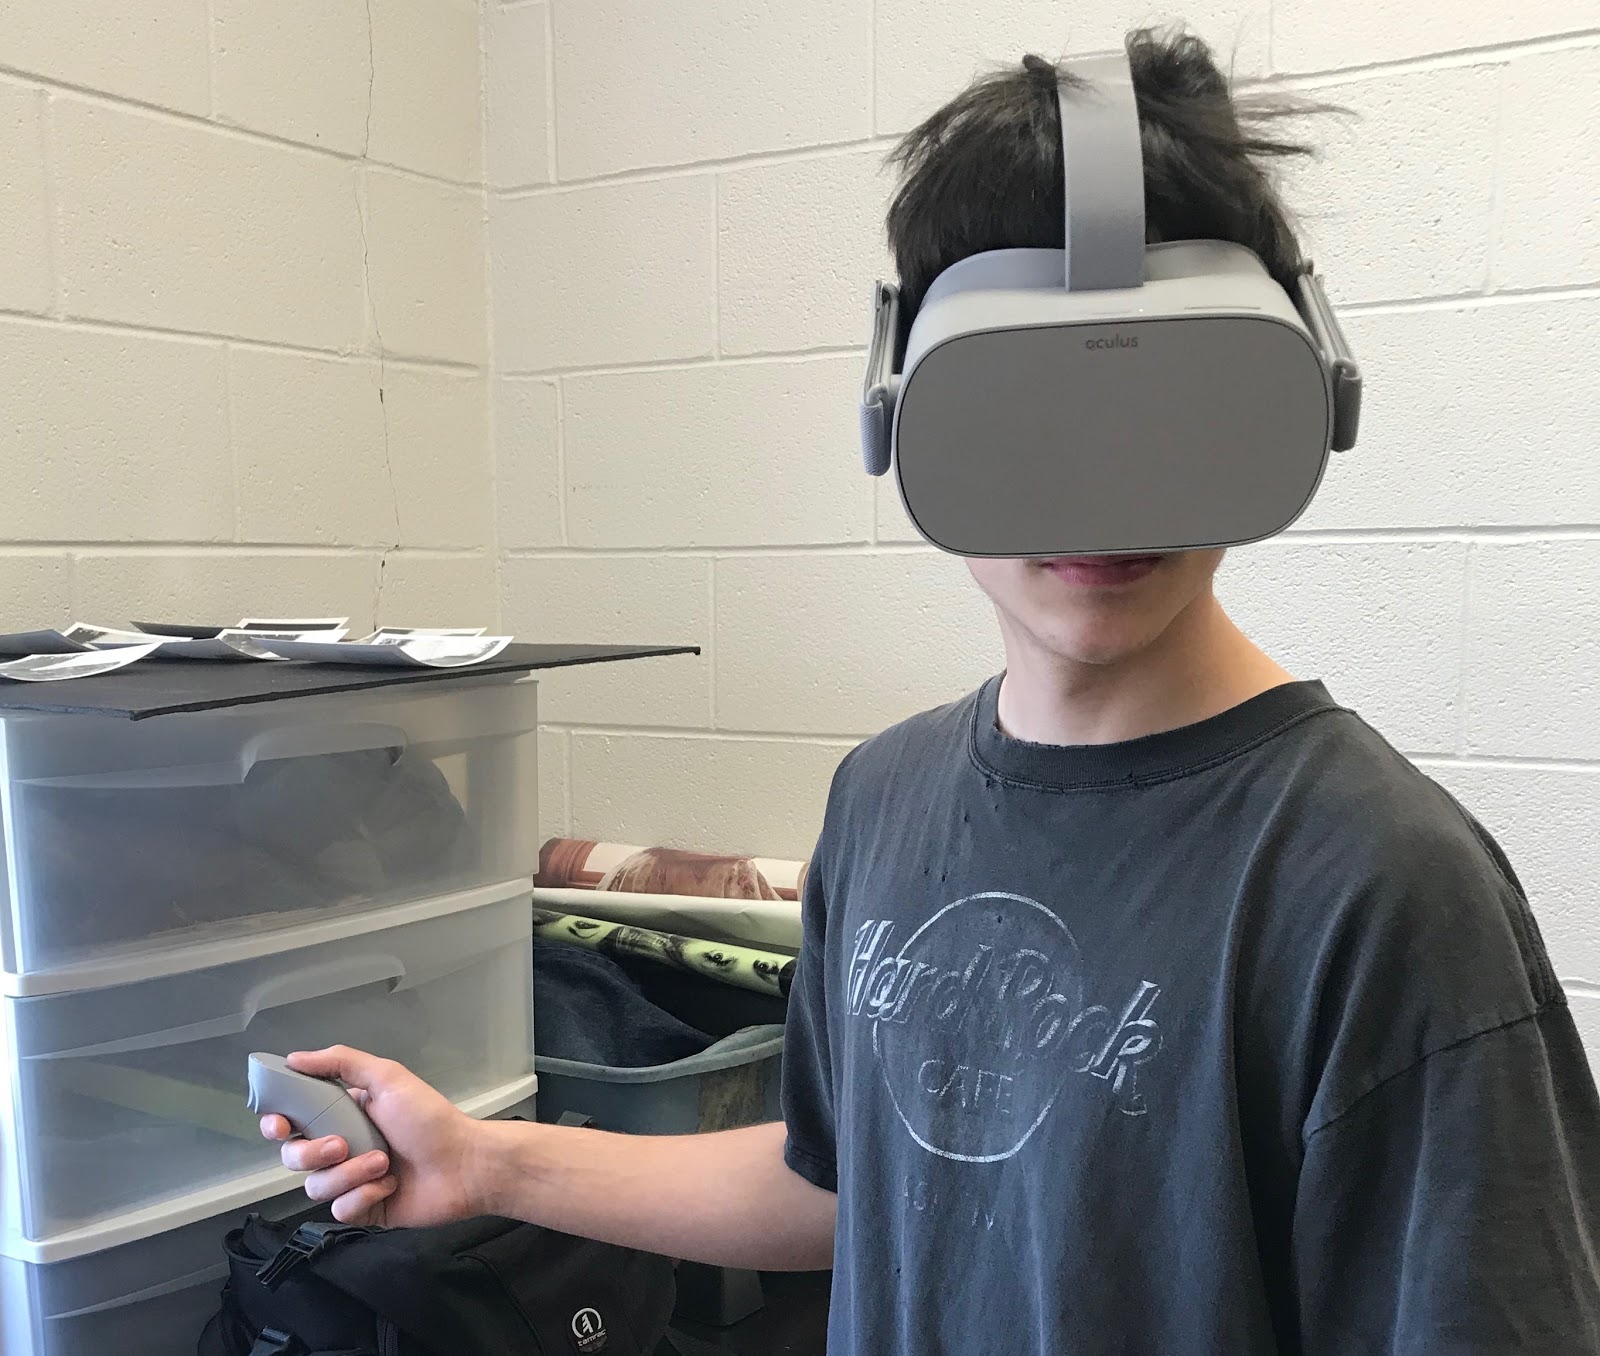 A student uses the Oculus Go VR headset.